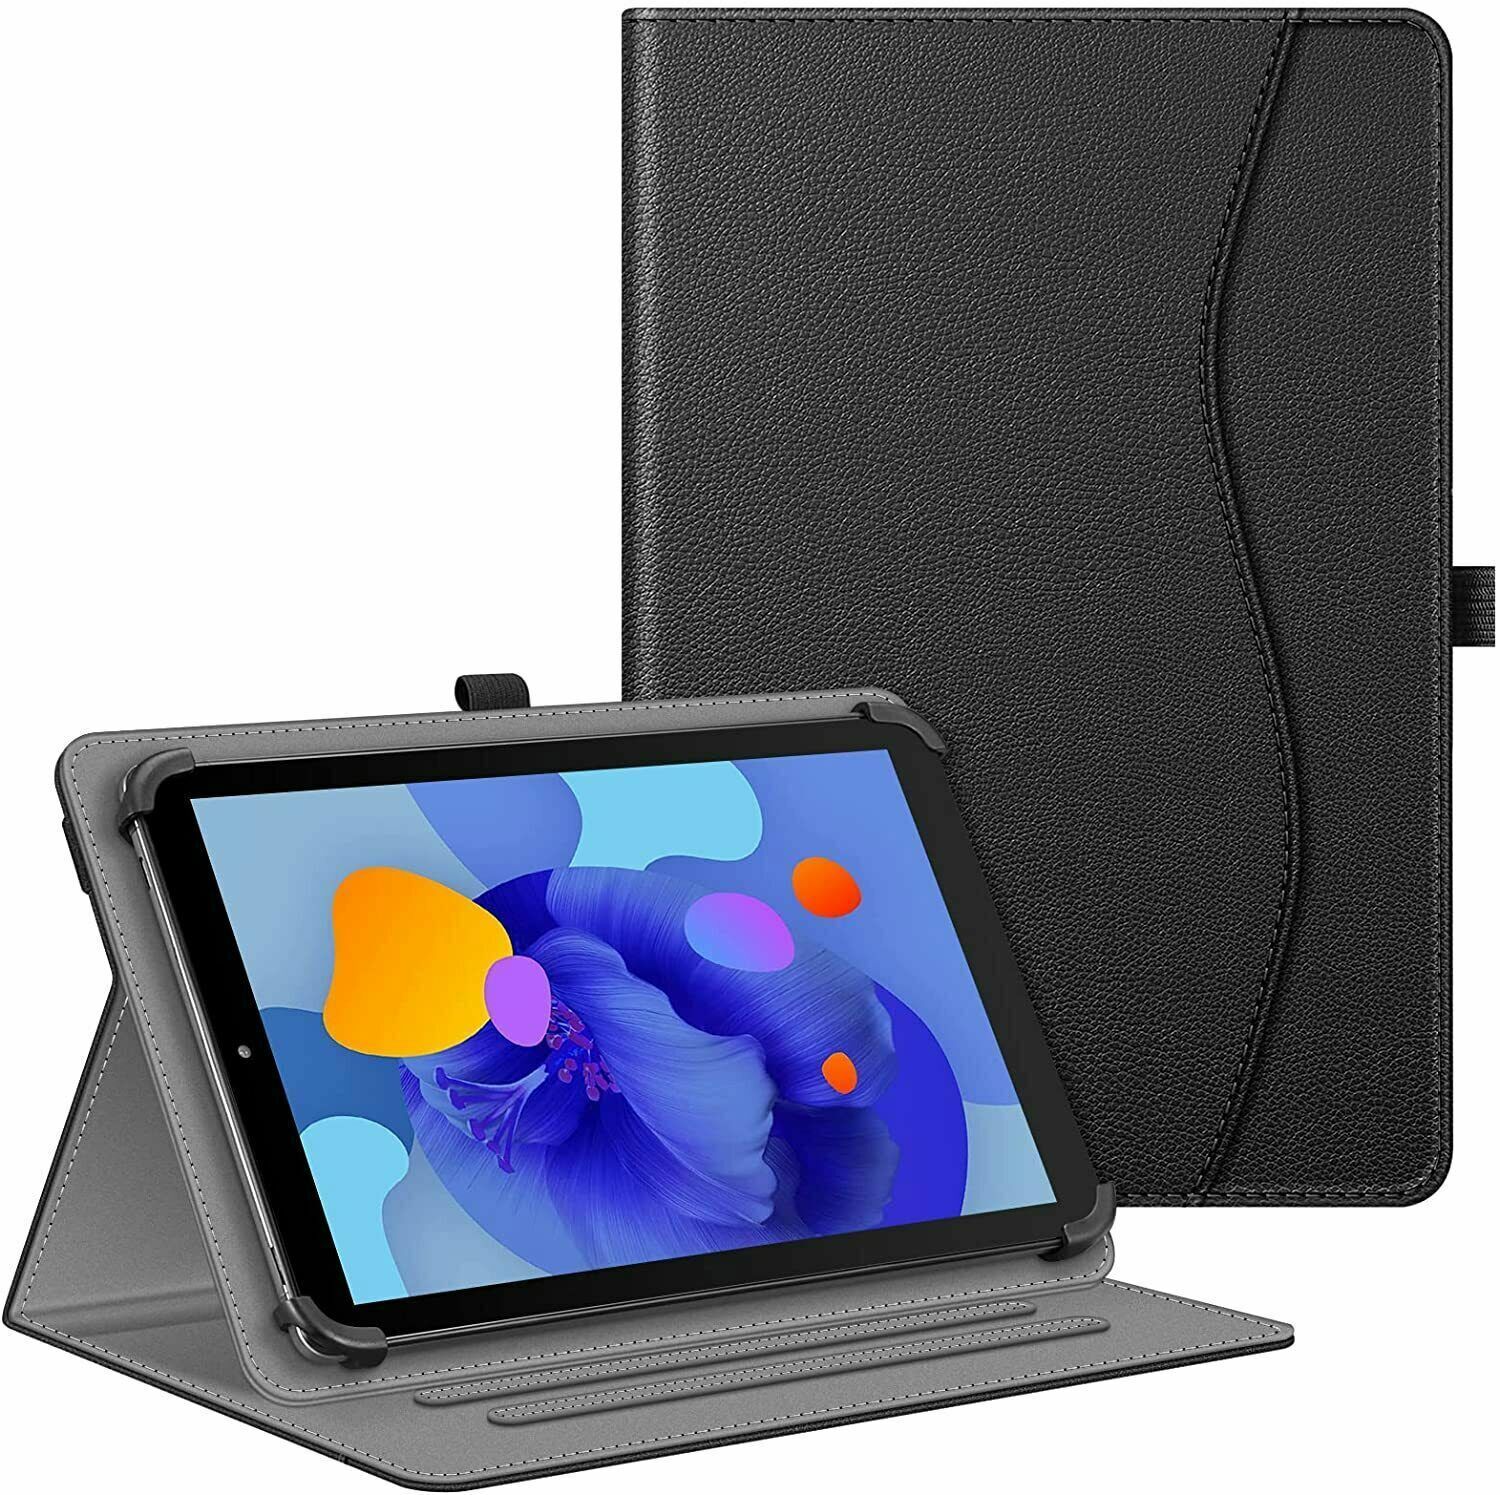 Universal Case for 9 10 10.1 inch Tablet for Coopers, ZZB, ATOZEE, Qukenk, TECLA